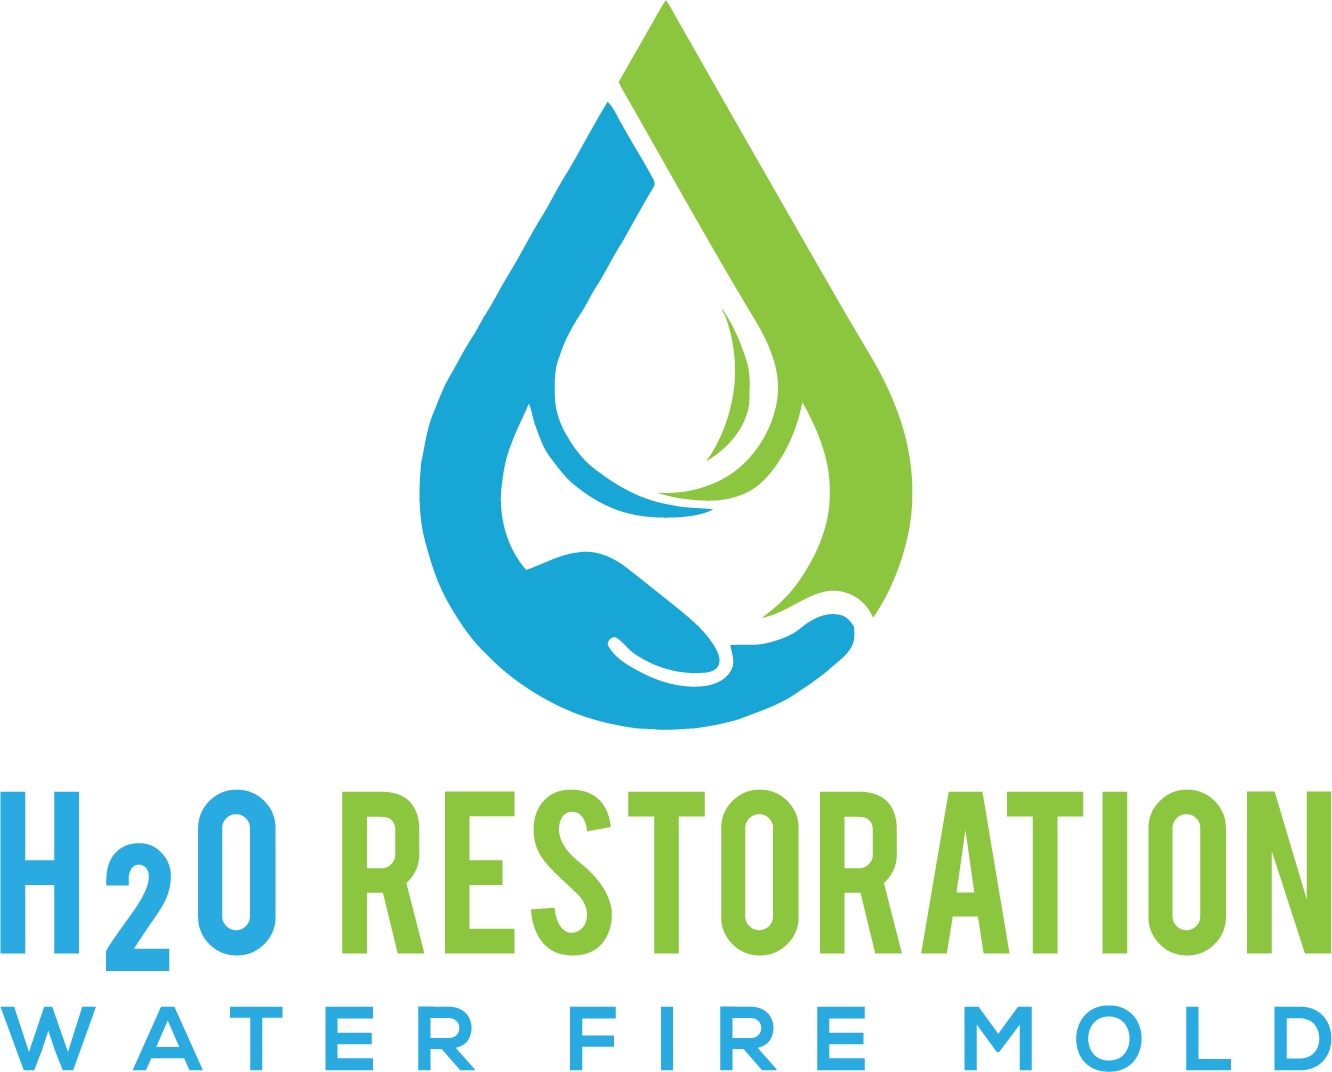 A logo for a company called h20 restoration water fire mold